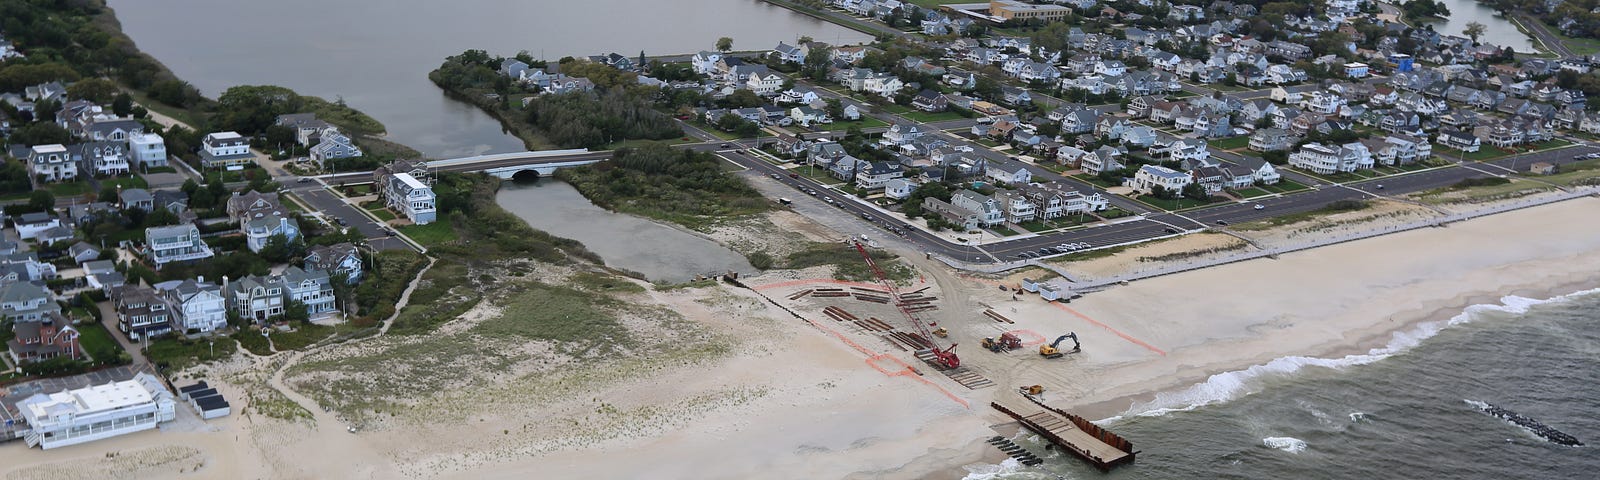 Aerial photo of coastal community. Beach separates the ocean from a waterway leading to a pond. Heavy machinery is working on the beach